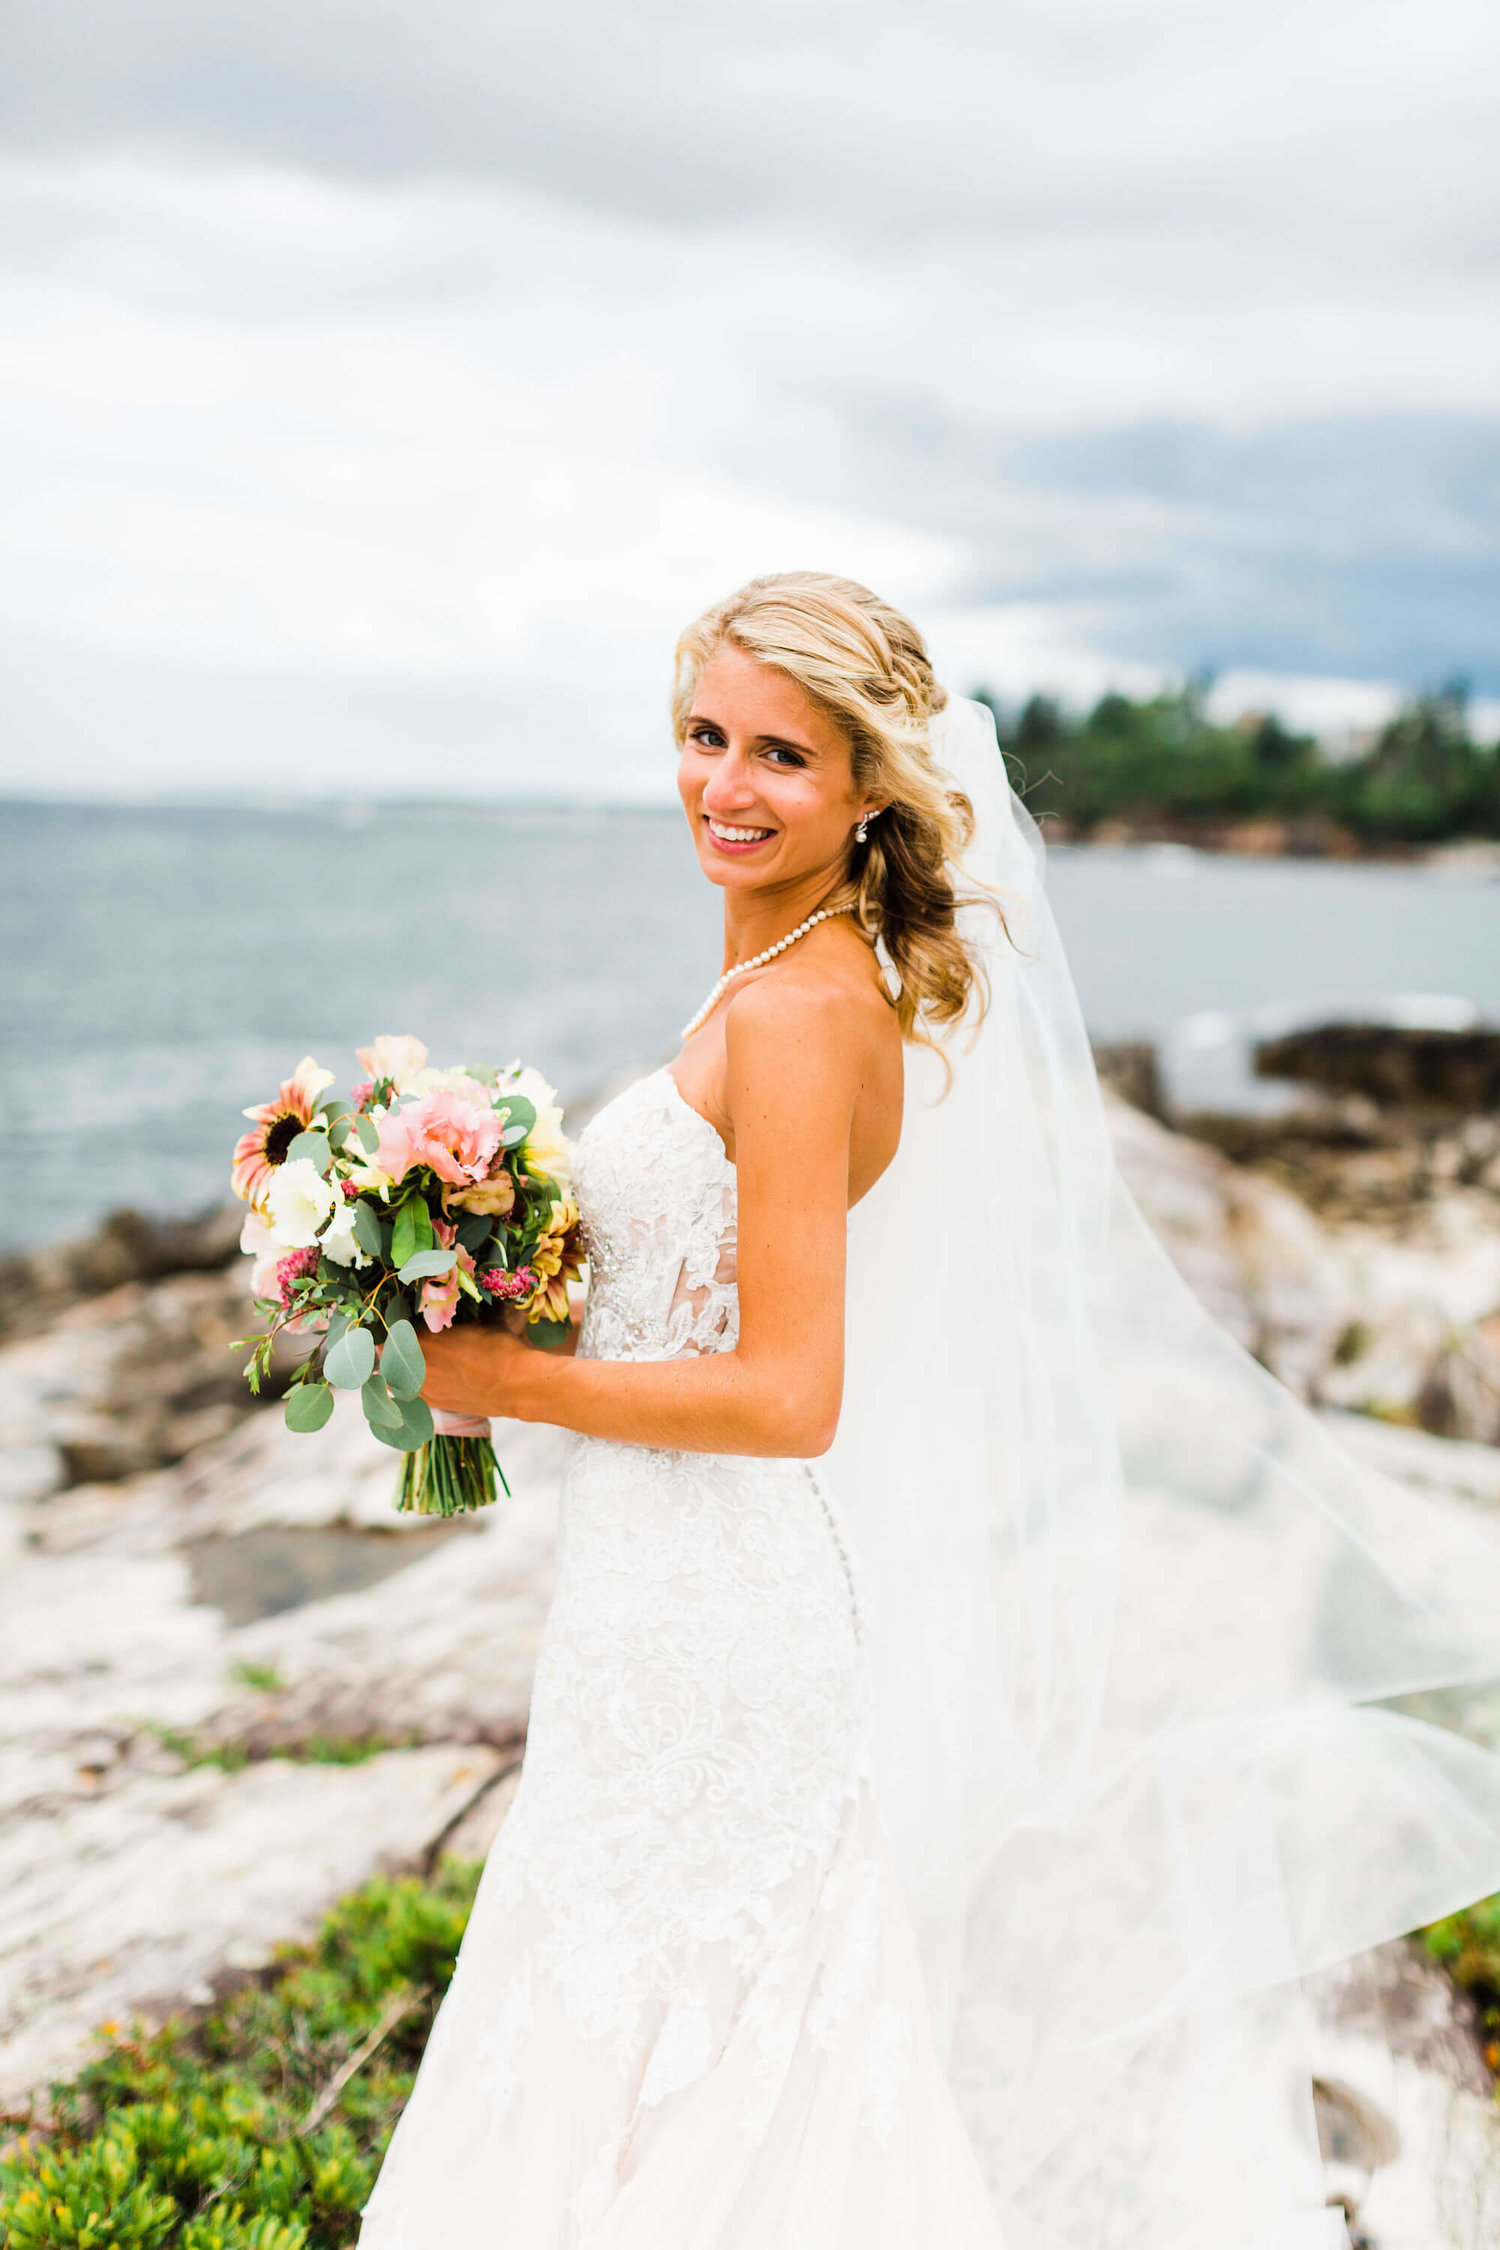 A Nautical Themed Wedding on Long Island — Pinch Me Planning - Maine ...